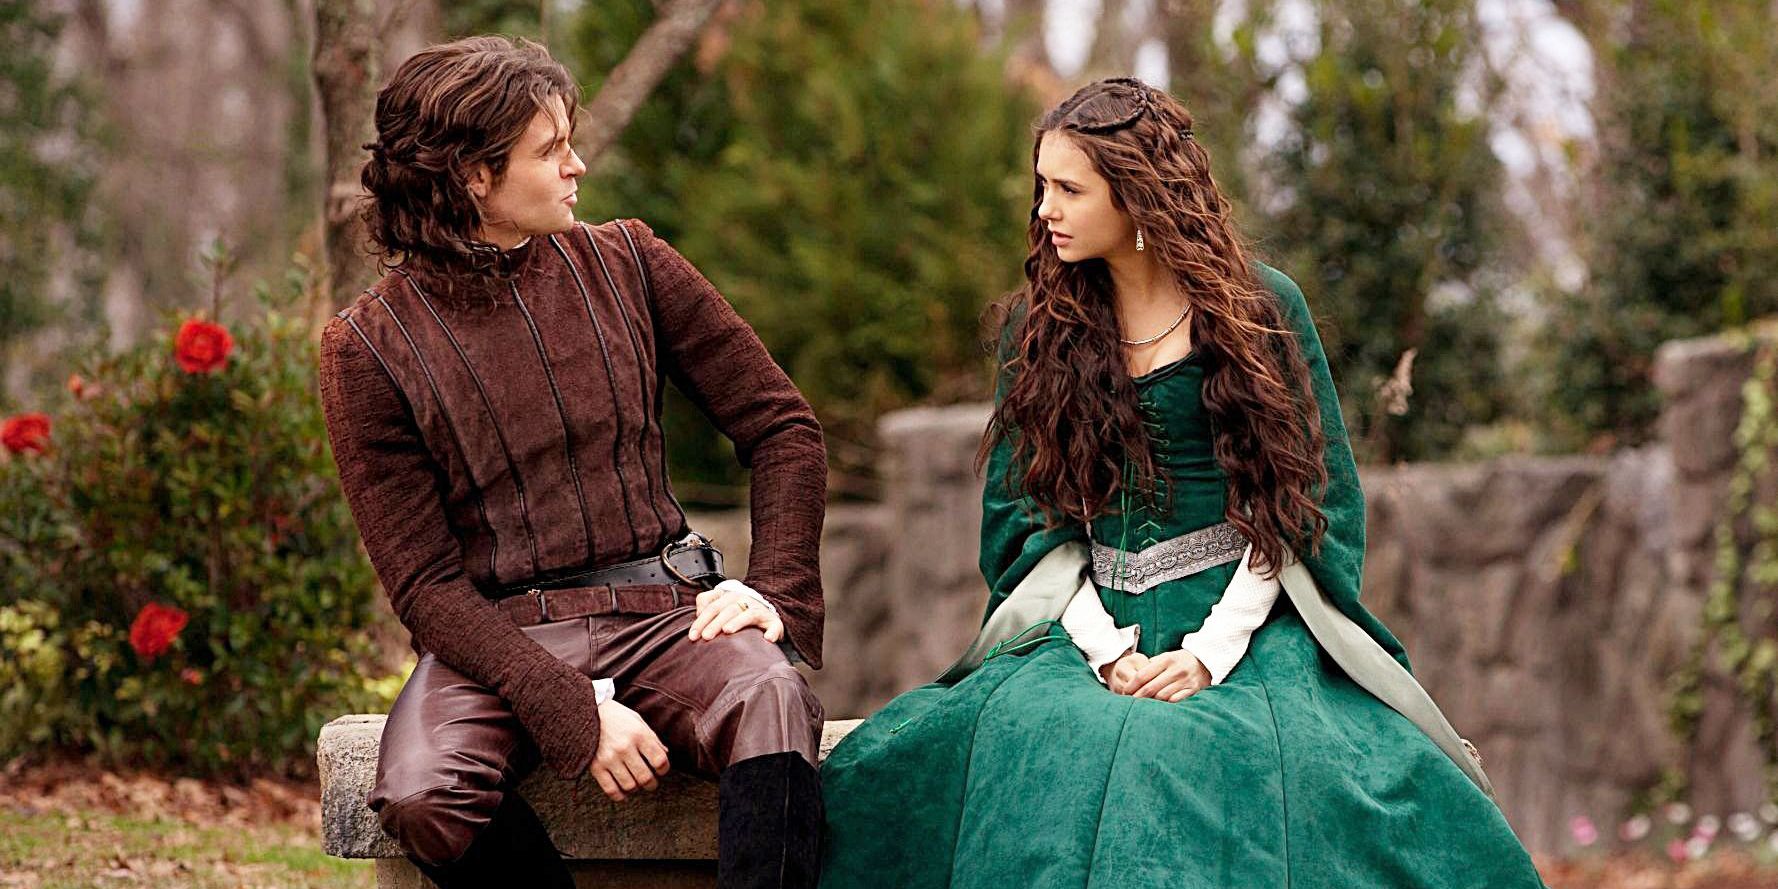 Katherine and Elijah sitting on a bench in The Vampire Diaries.